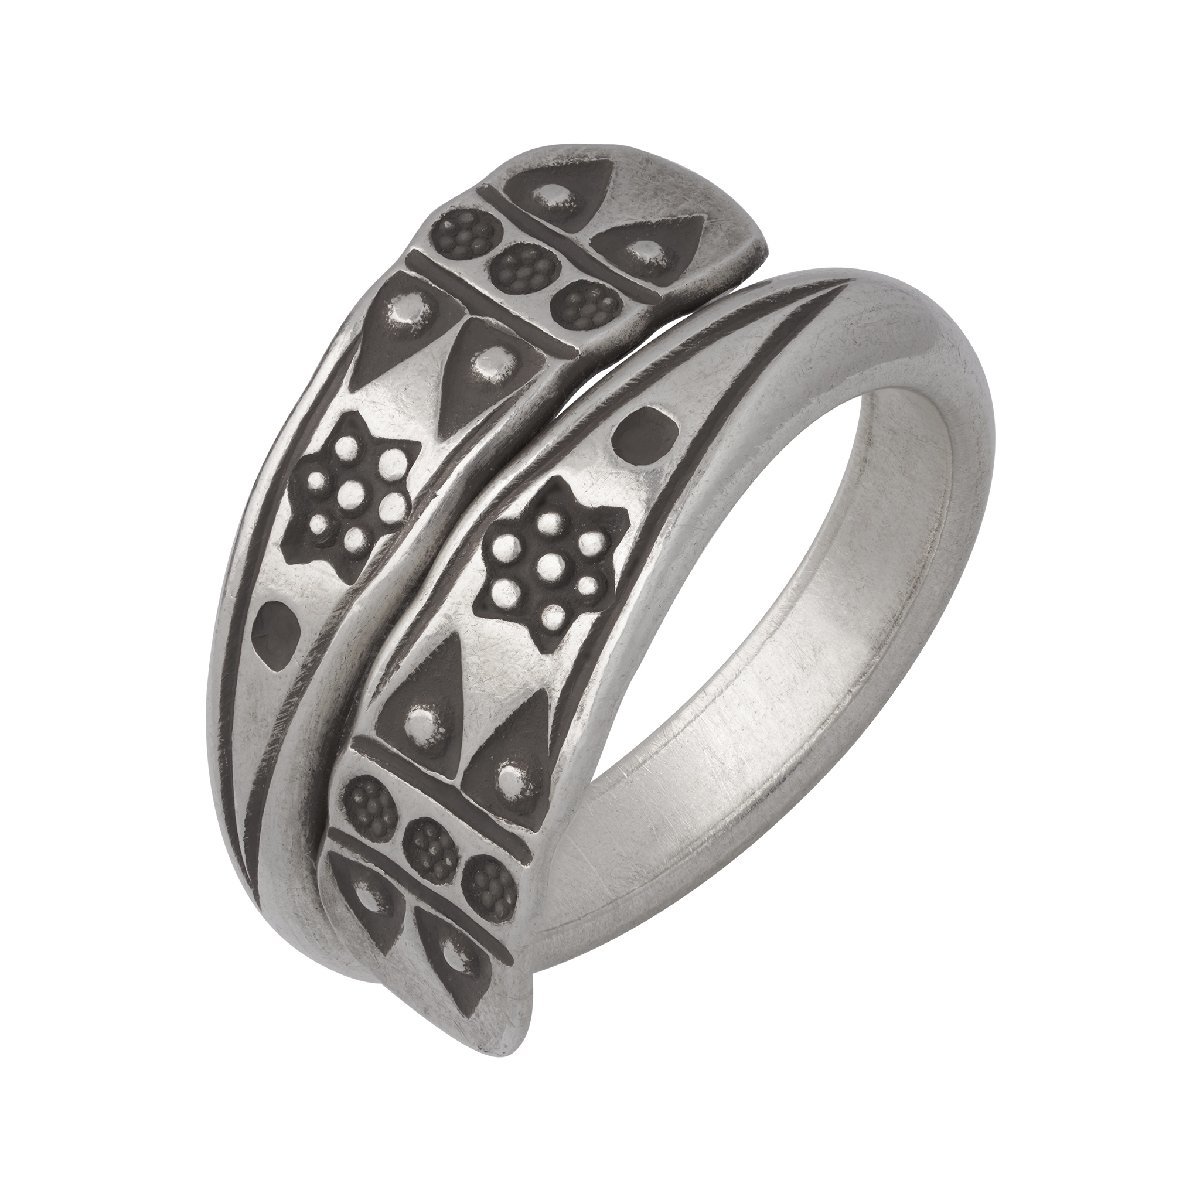 23 number adjustment Curren group silver ring 9 number ~29 number free size ring wide width men's lady's race writing sama SV950 a07-67